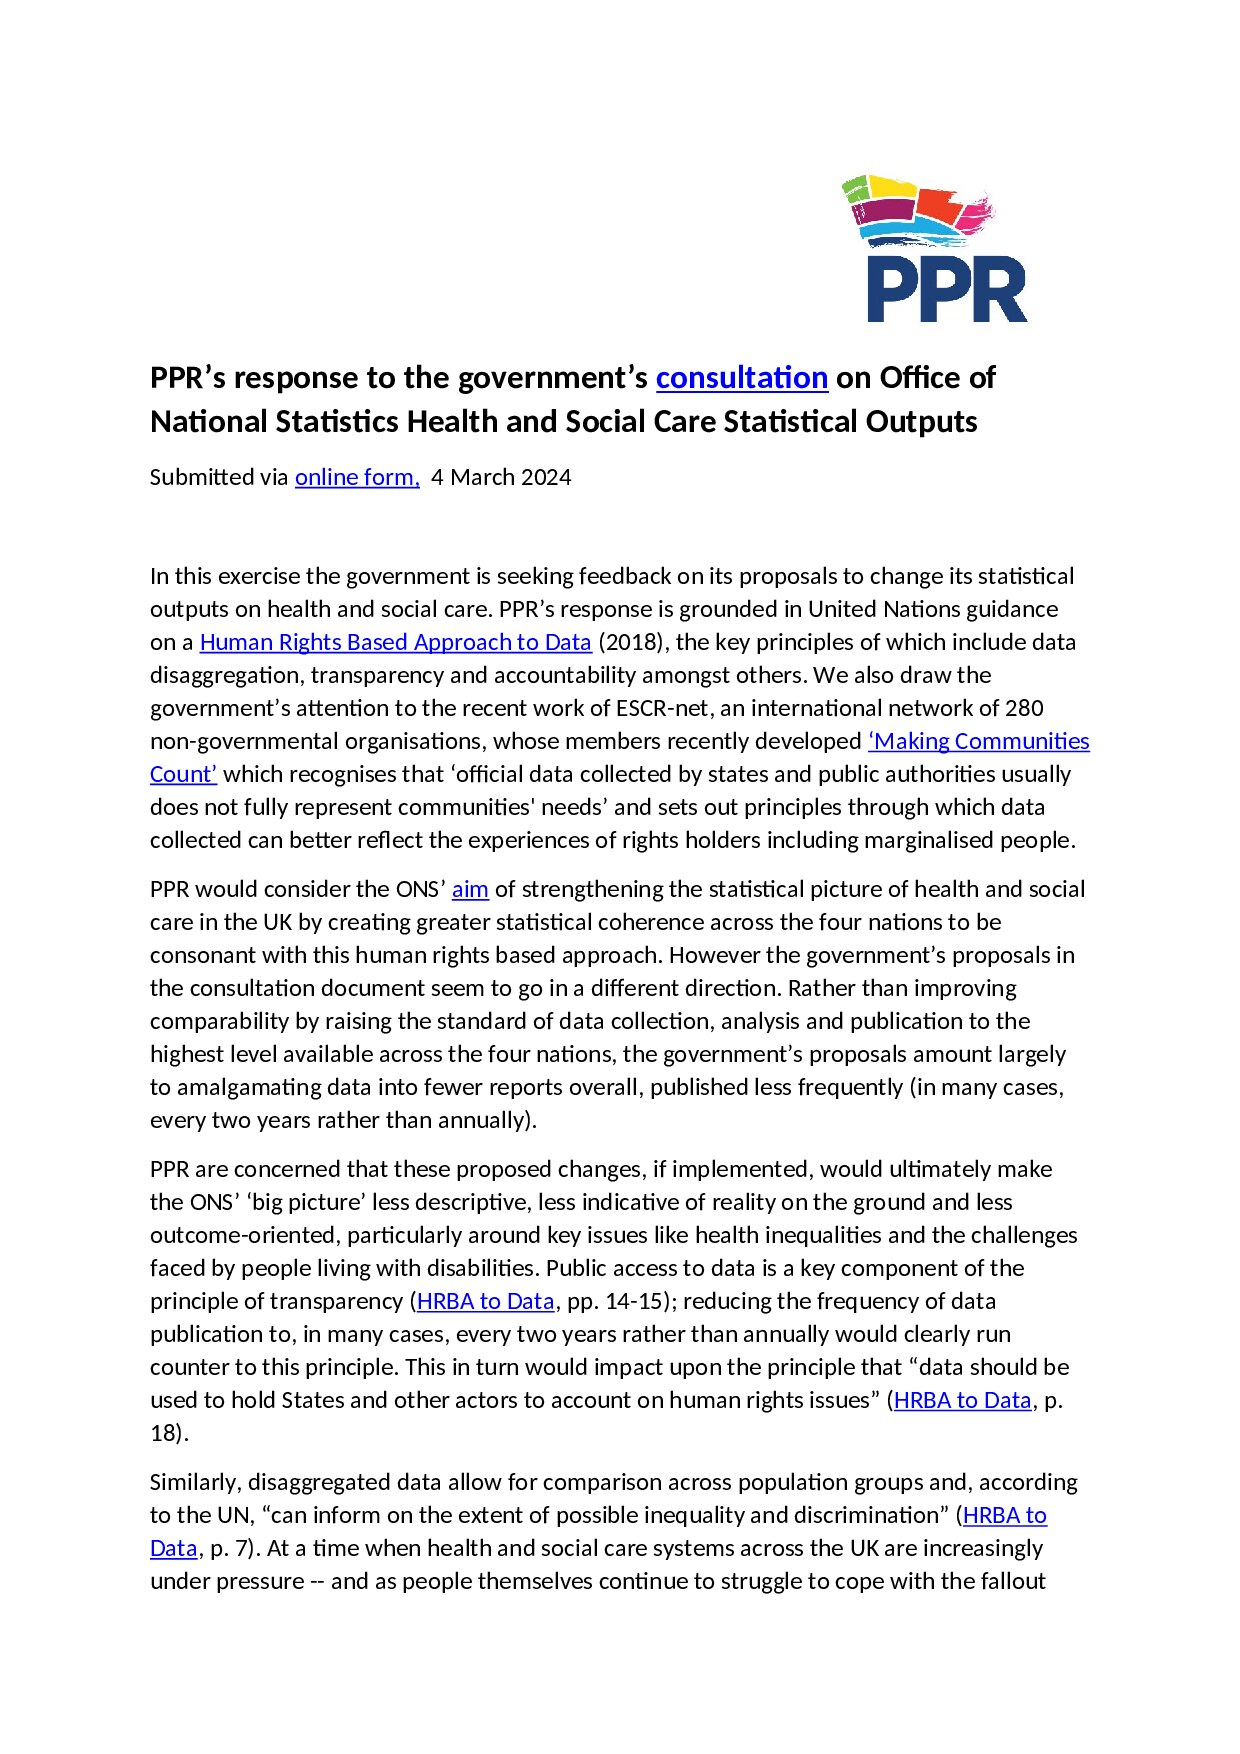 PPR’s response to the government’s consultation on Office of National Statistics Health and Social Care Statistical Outputs